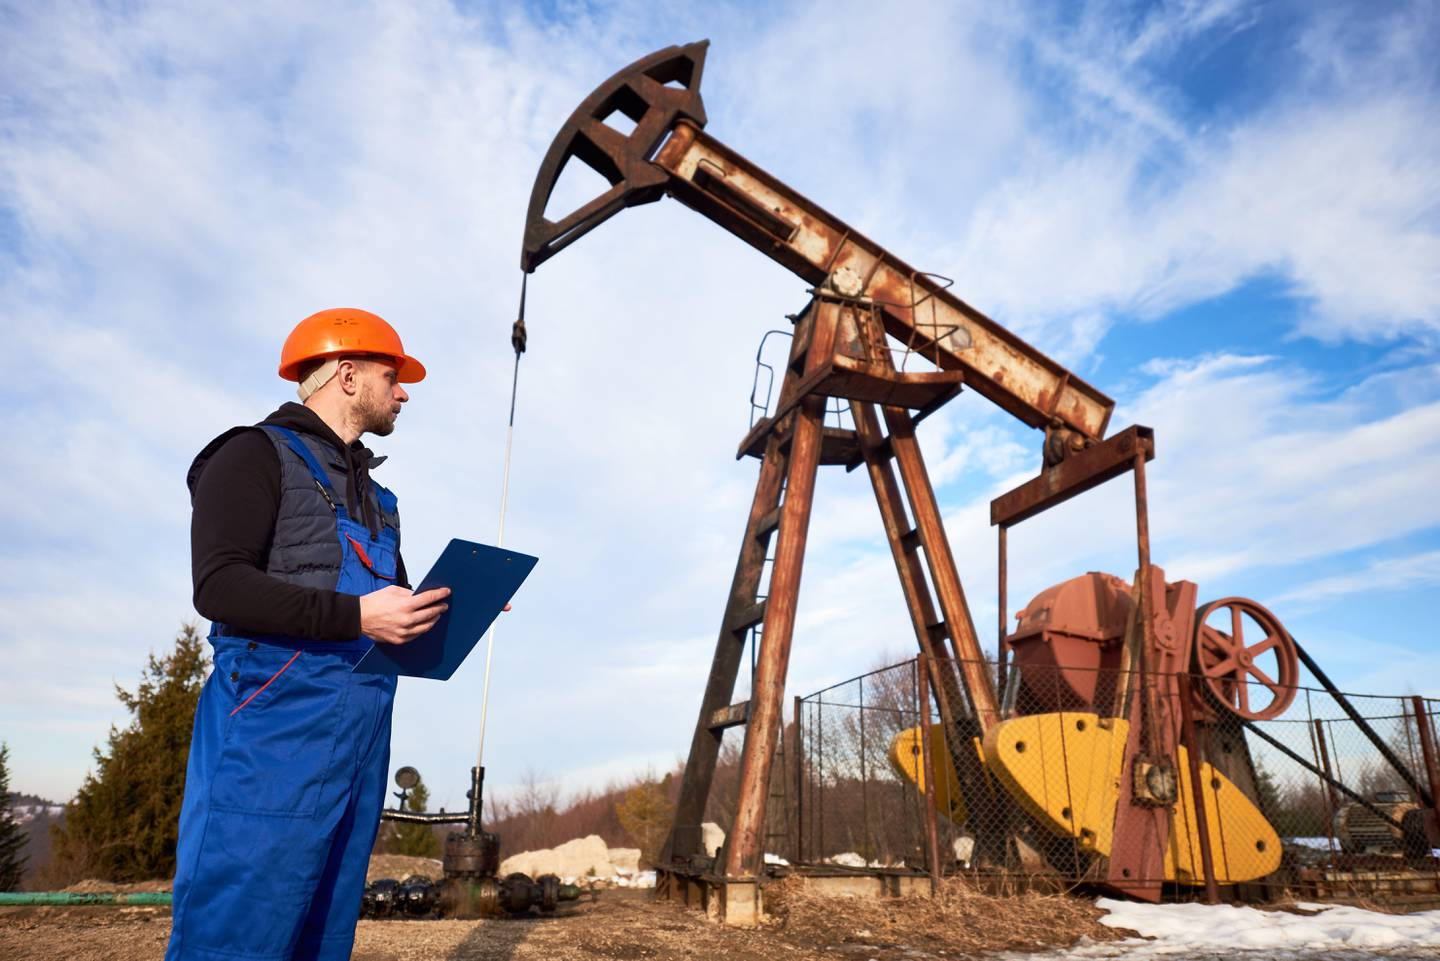 An engineer checks an oil pumping unit. The transition to green energies will spur demand for process engineers and technology specialists, experts say. Photo: Alamy